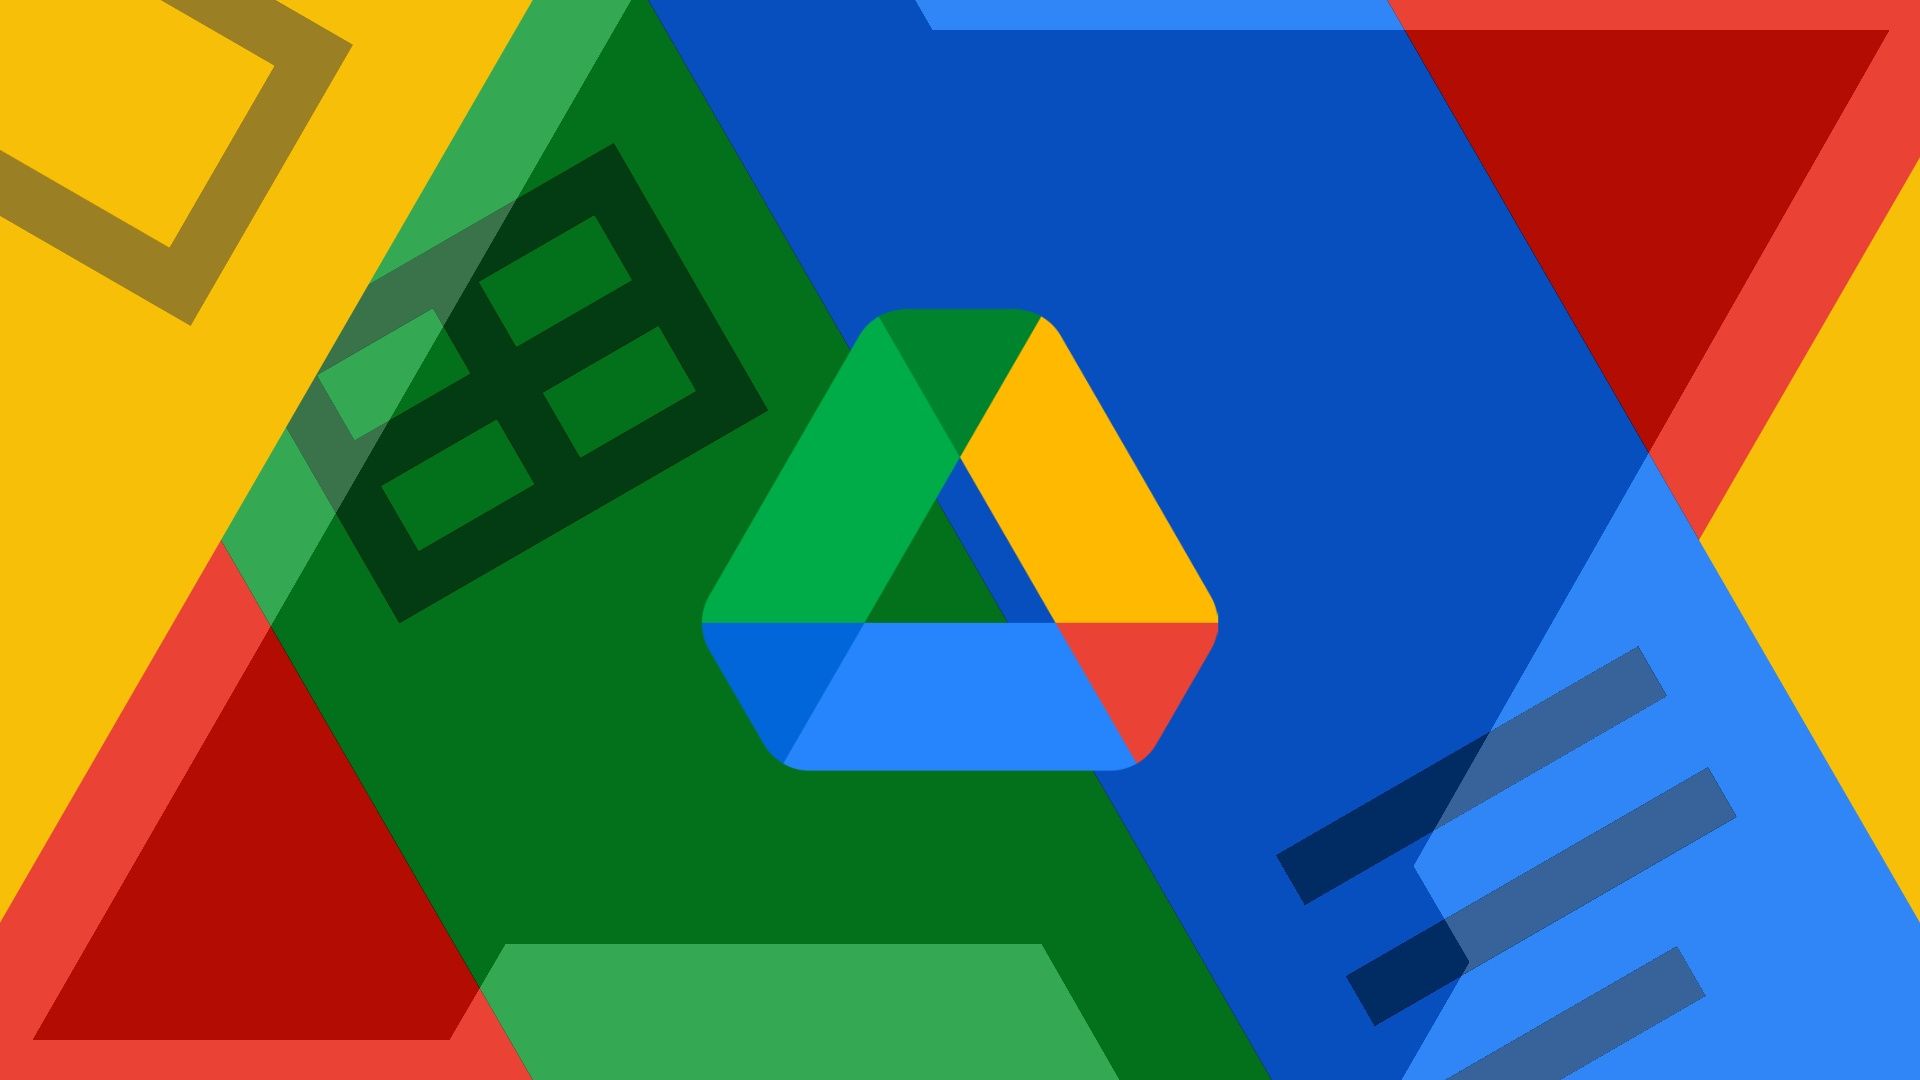 The Google Drive logo on a background with the Android Police logo and the Google Sheets, Google Docs, and Google Slides logos and colors